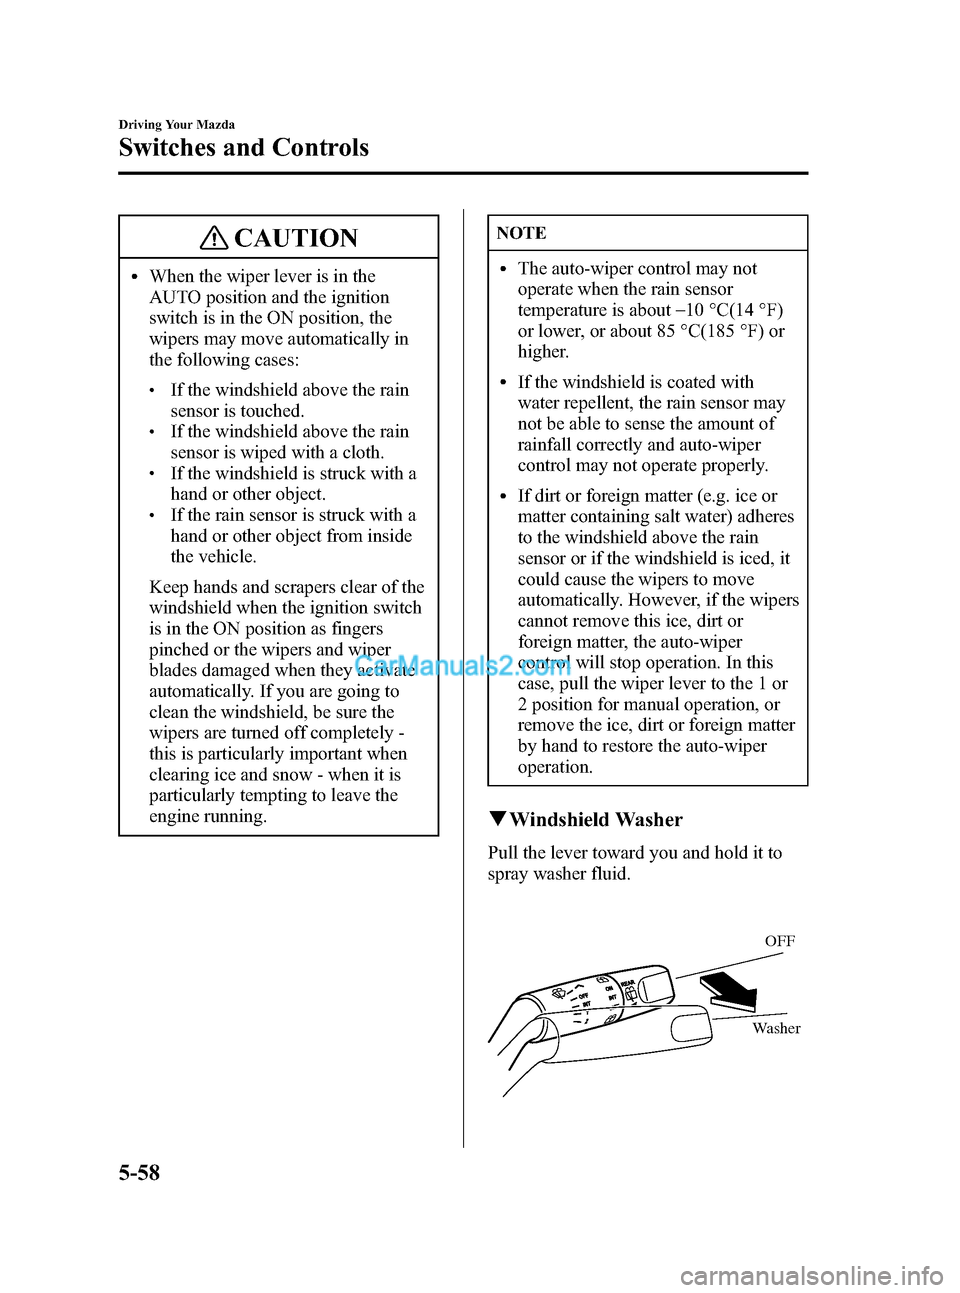 MAZDA MODEL MAZDASPEED 3 2007  Owners Manual (in English) Black plate (180,1)
CAUTION
lWhen the wiper lever is in the
AUTO position and the ignition
switch is in the ON position, the
wipers may move automatically in
the following cases:
lIf the windshield ab